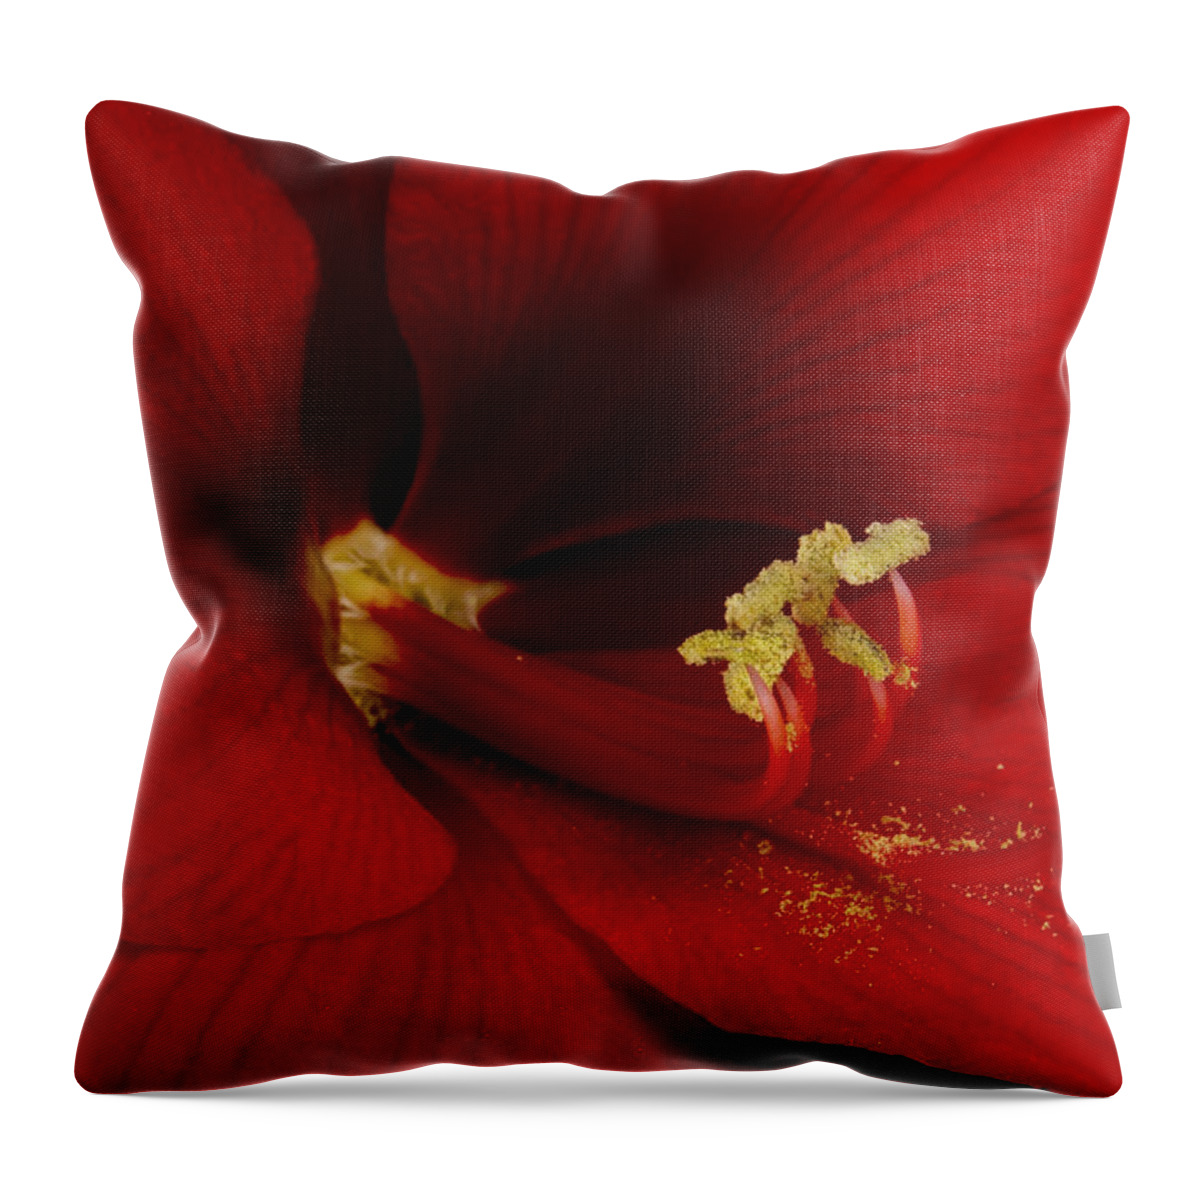 Amaryllis Throw Pillow featuring the photograph Orange Amaryllis Bloom #1 by James BO Insogna